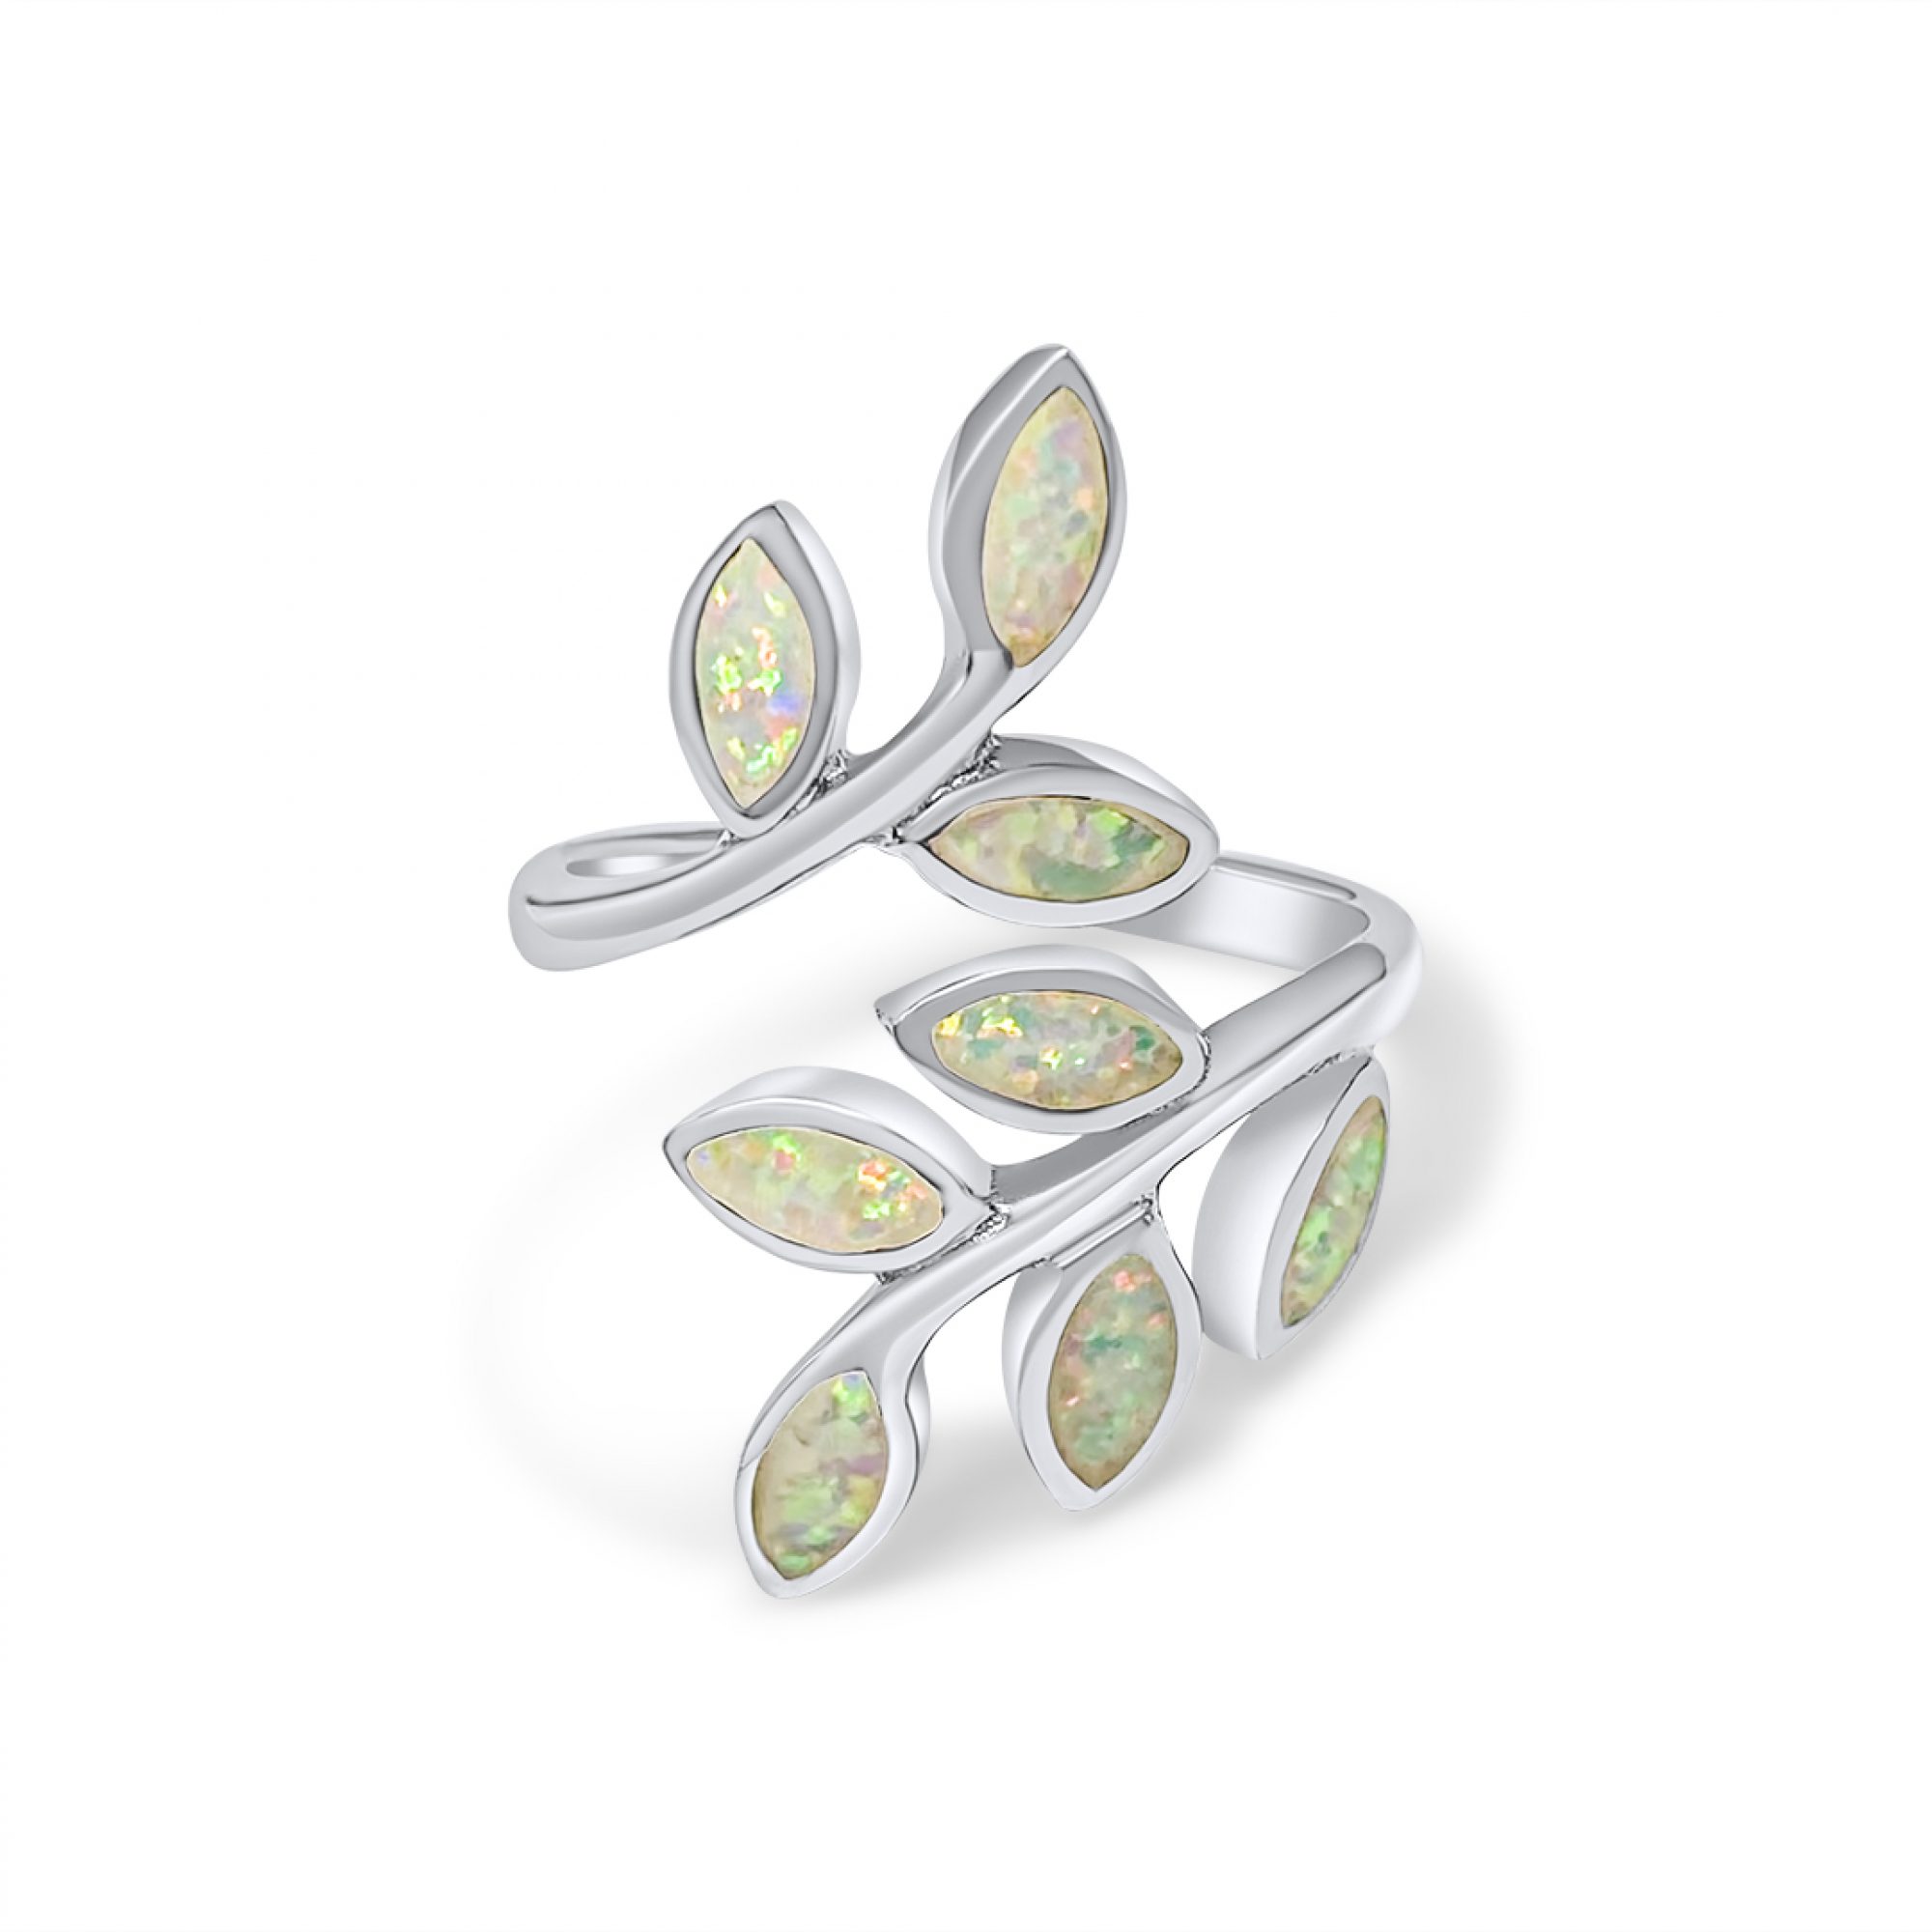 Silver olive branch ring with white opal